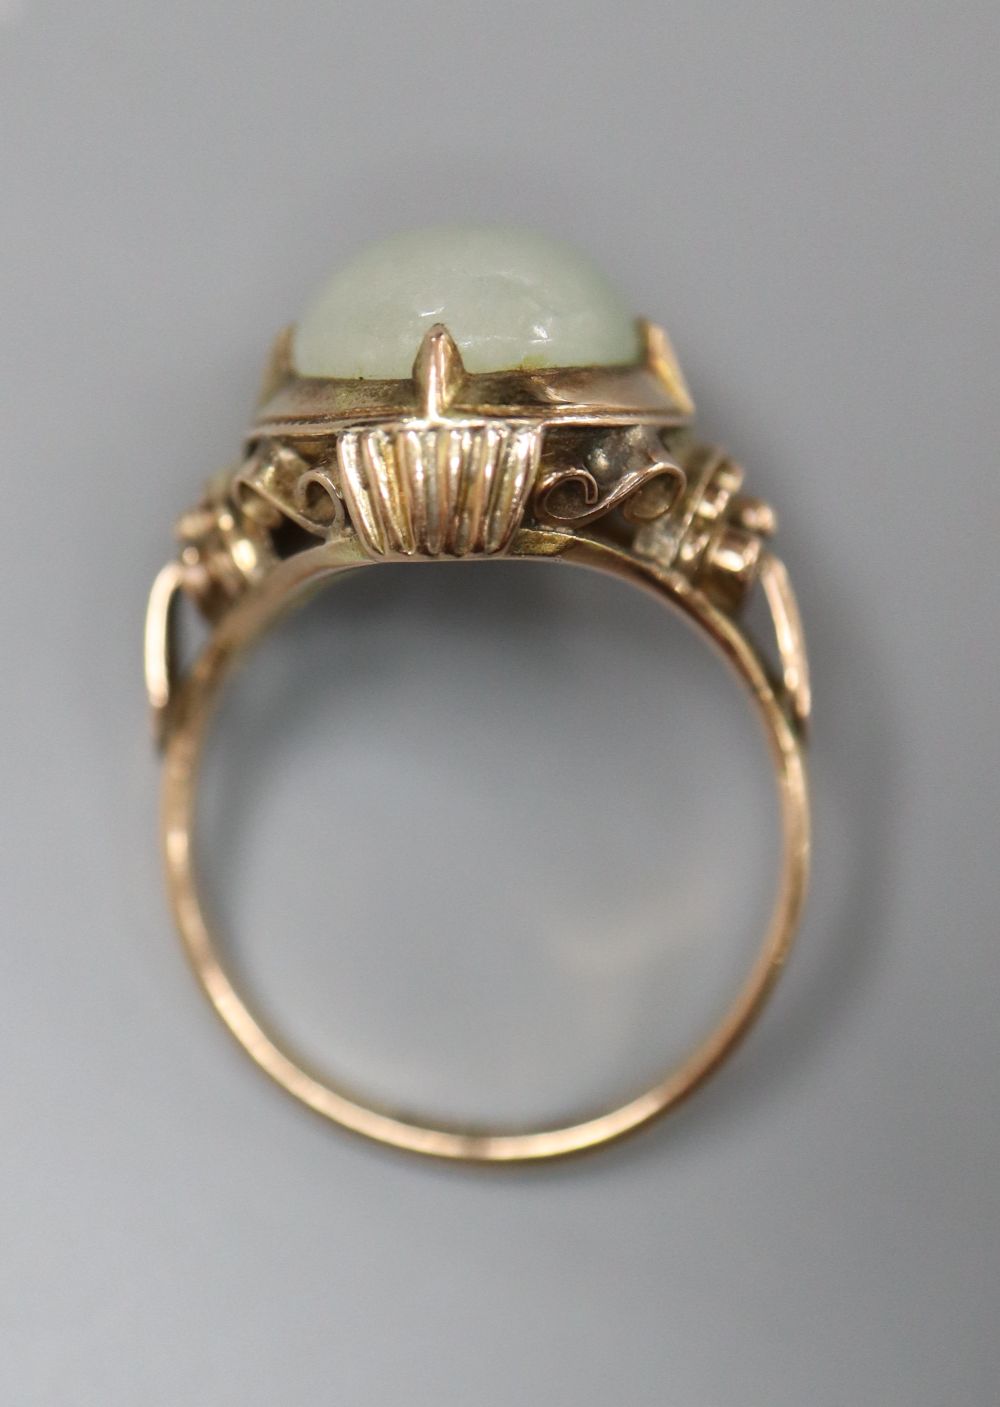 A 14k yellow metal and oval cabochon jade set ring, size L/M, gross 5 grams.